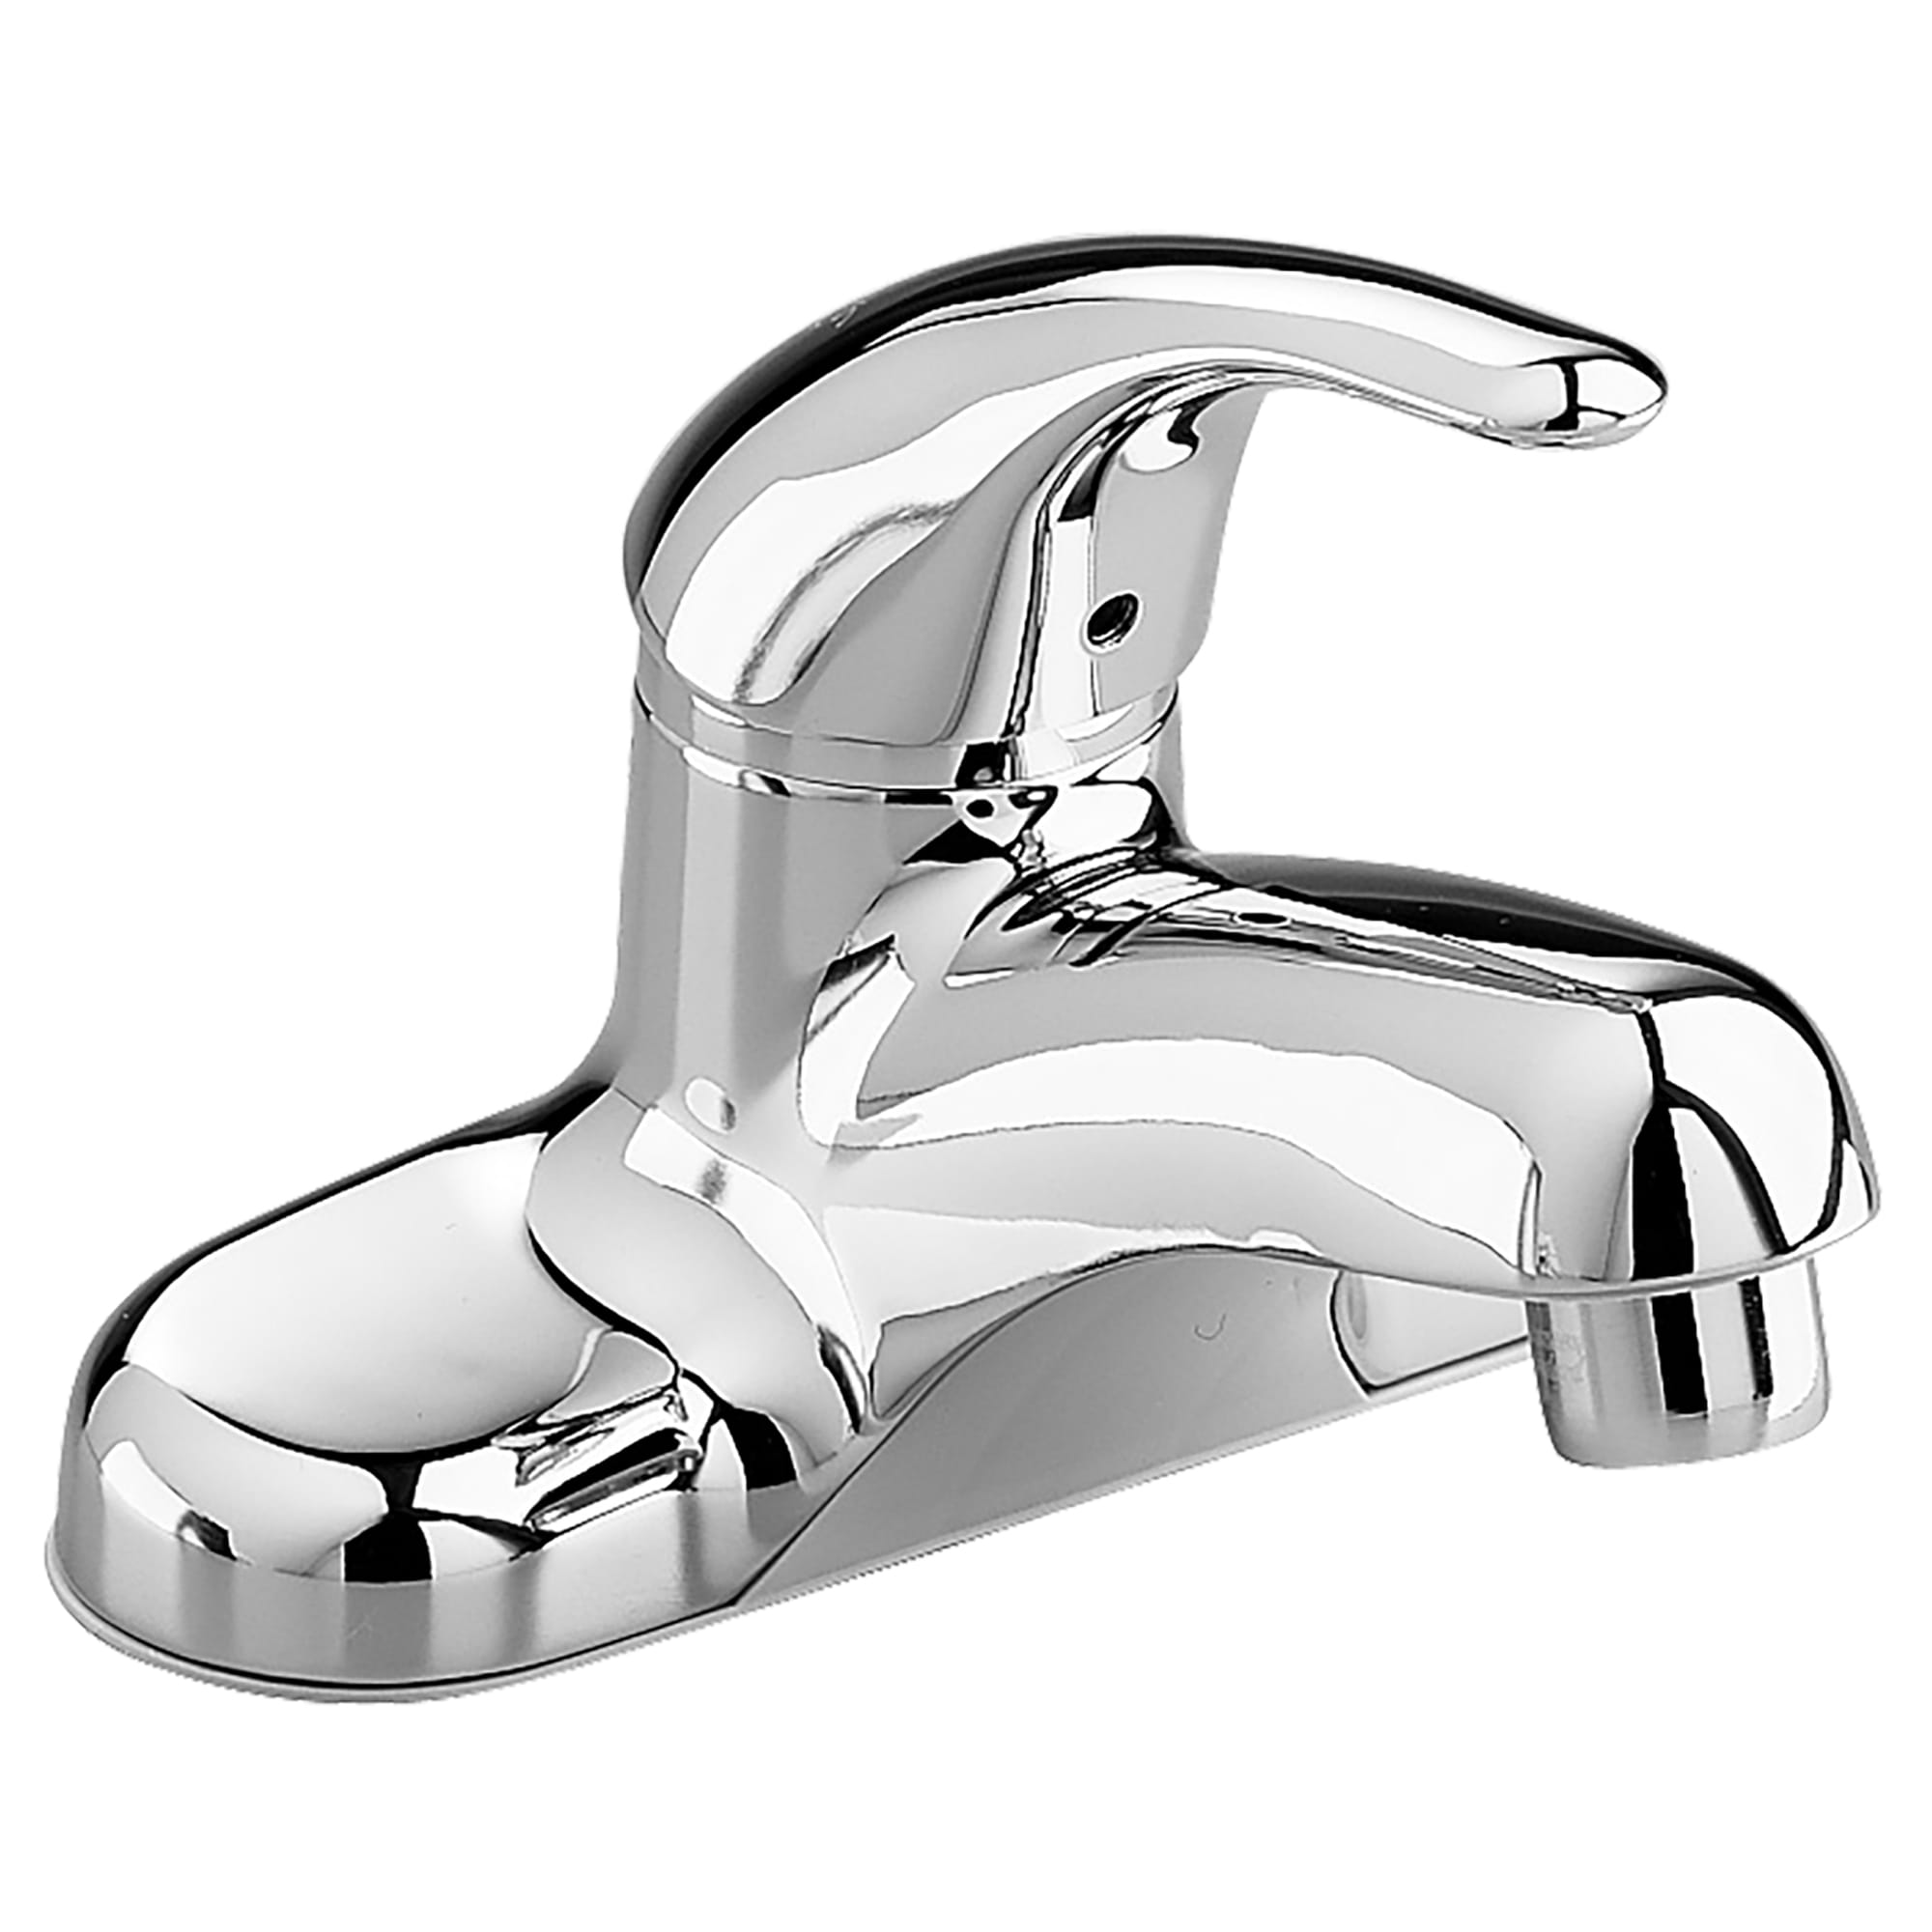 Colony® Soft 4-Inch Centerset Single-Handle Bathroom Faucet 1.2 gpm/4.5 L/min With Lever Handle